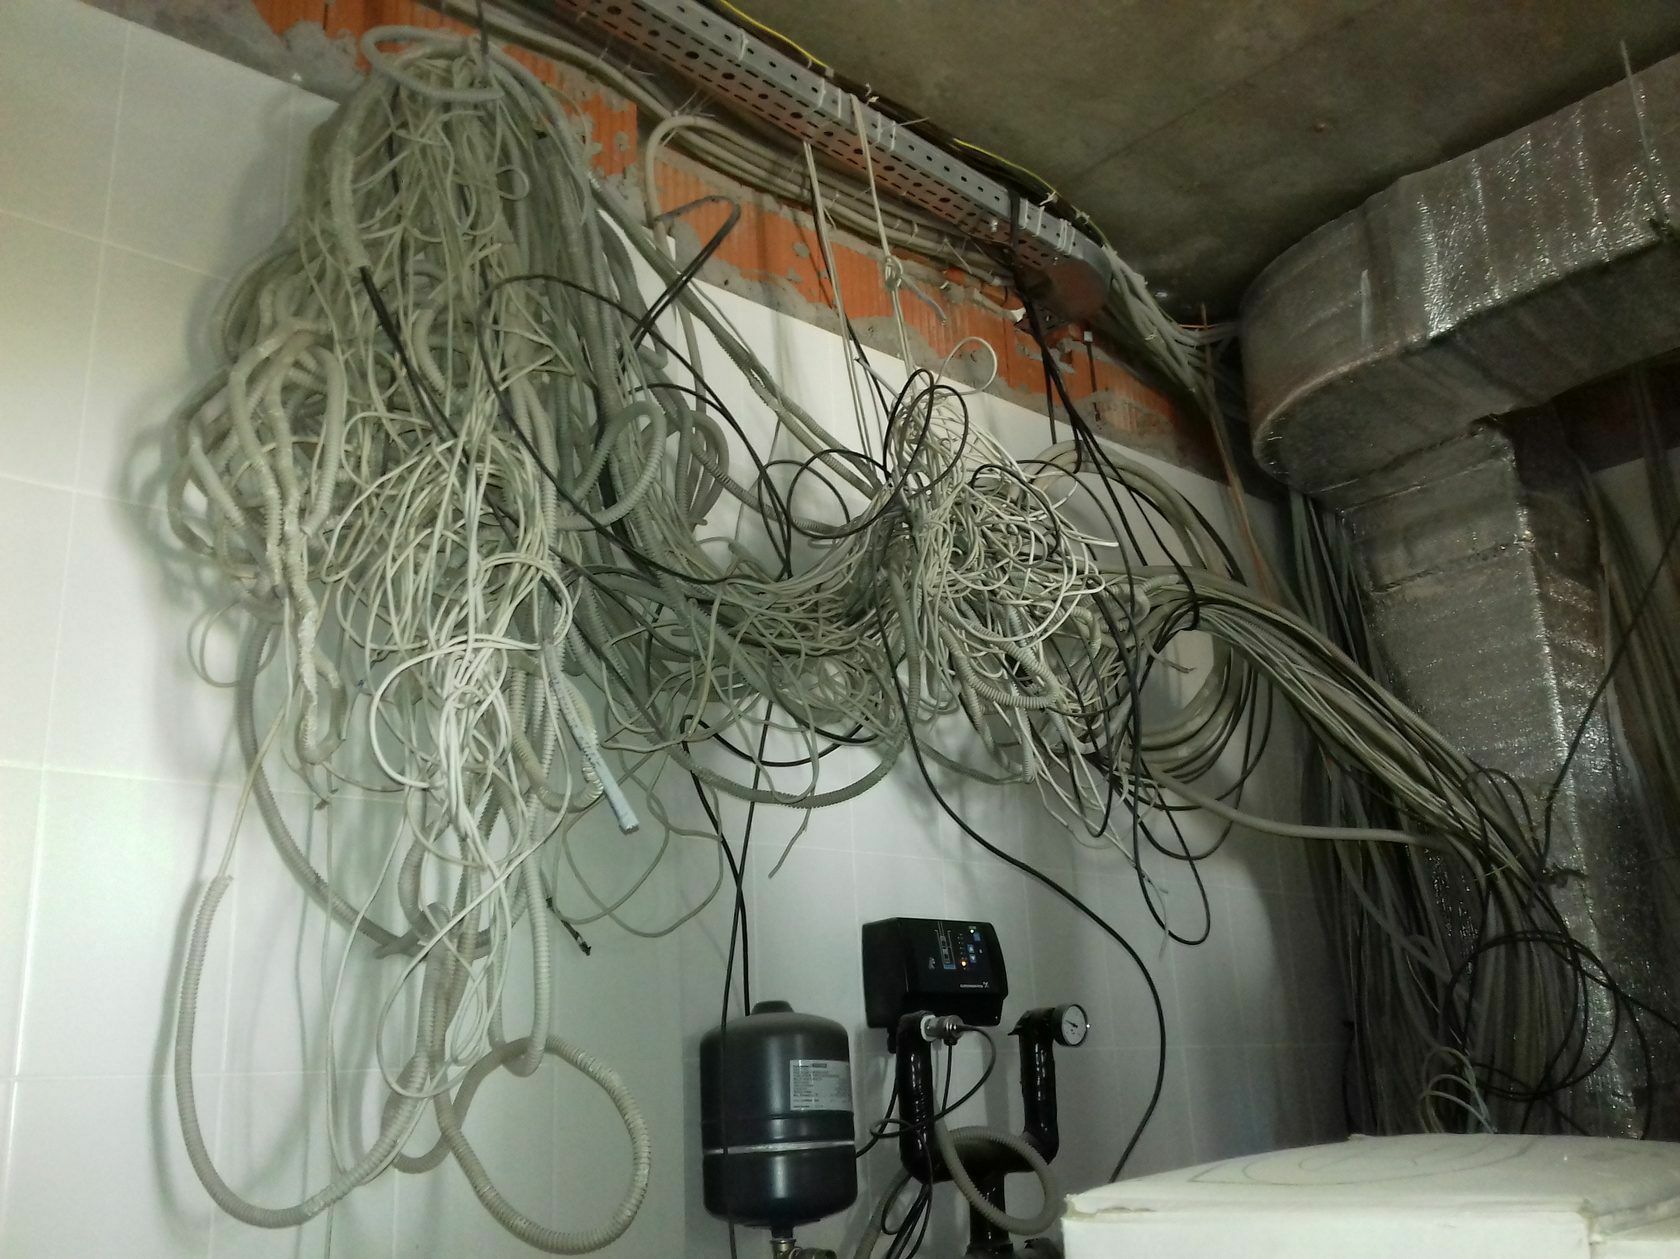 The Ministry of Construction was offered to check the wiring in the apartments